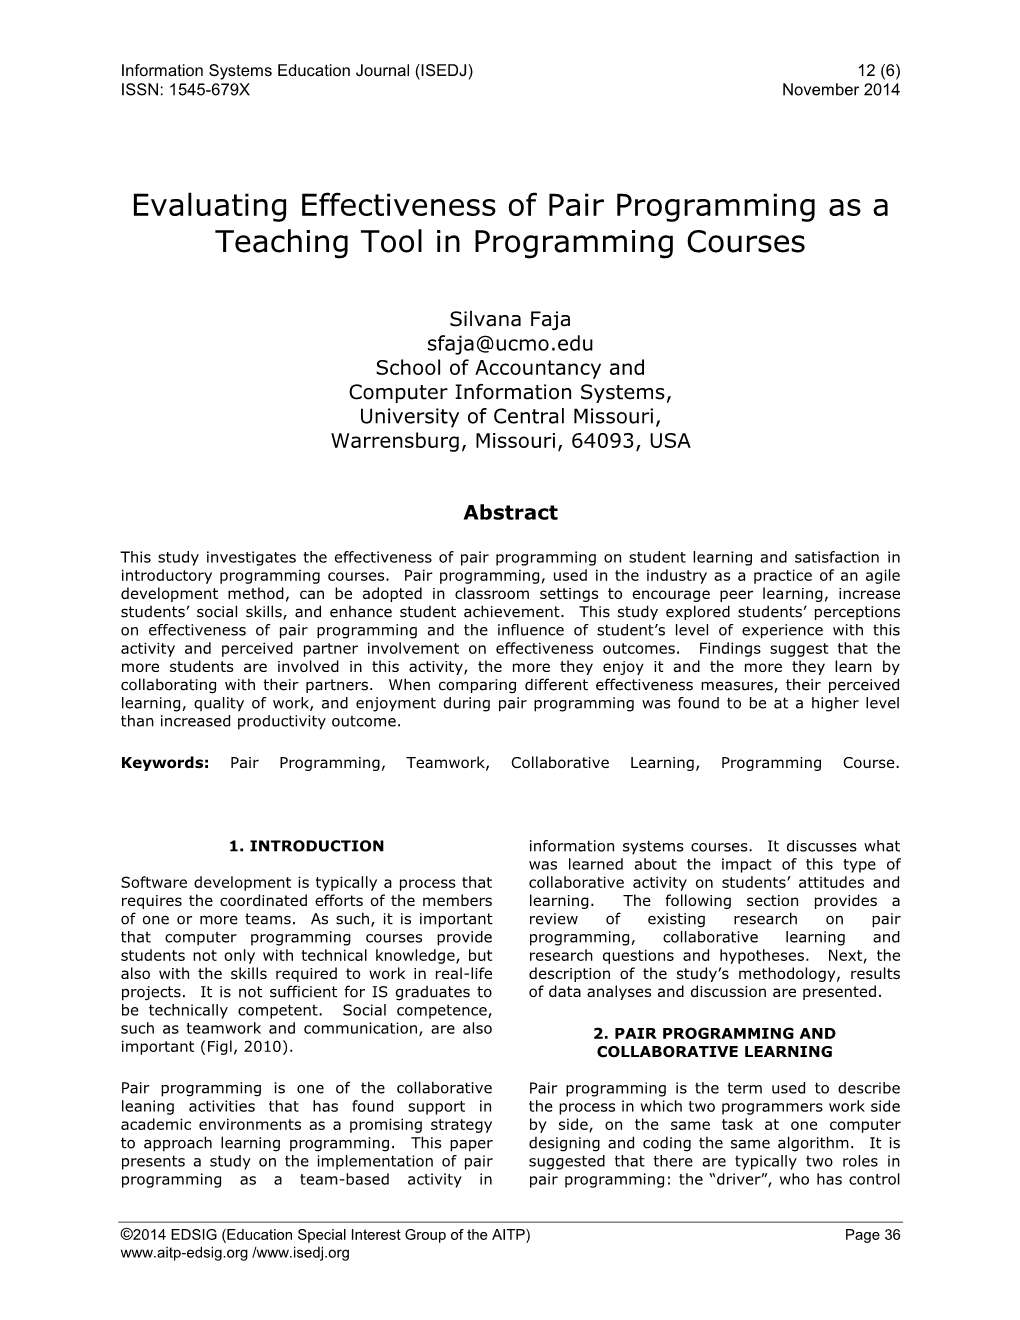 Evaluating Effectiveness of Pair Programming As a Teaching Tool in Programming Courses